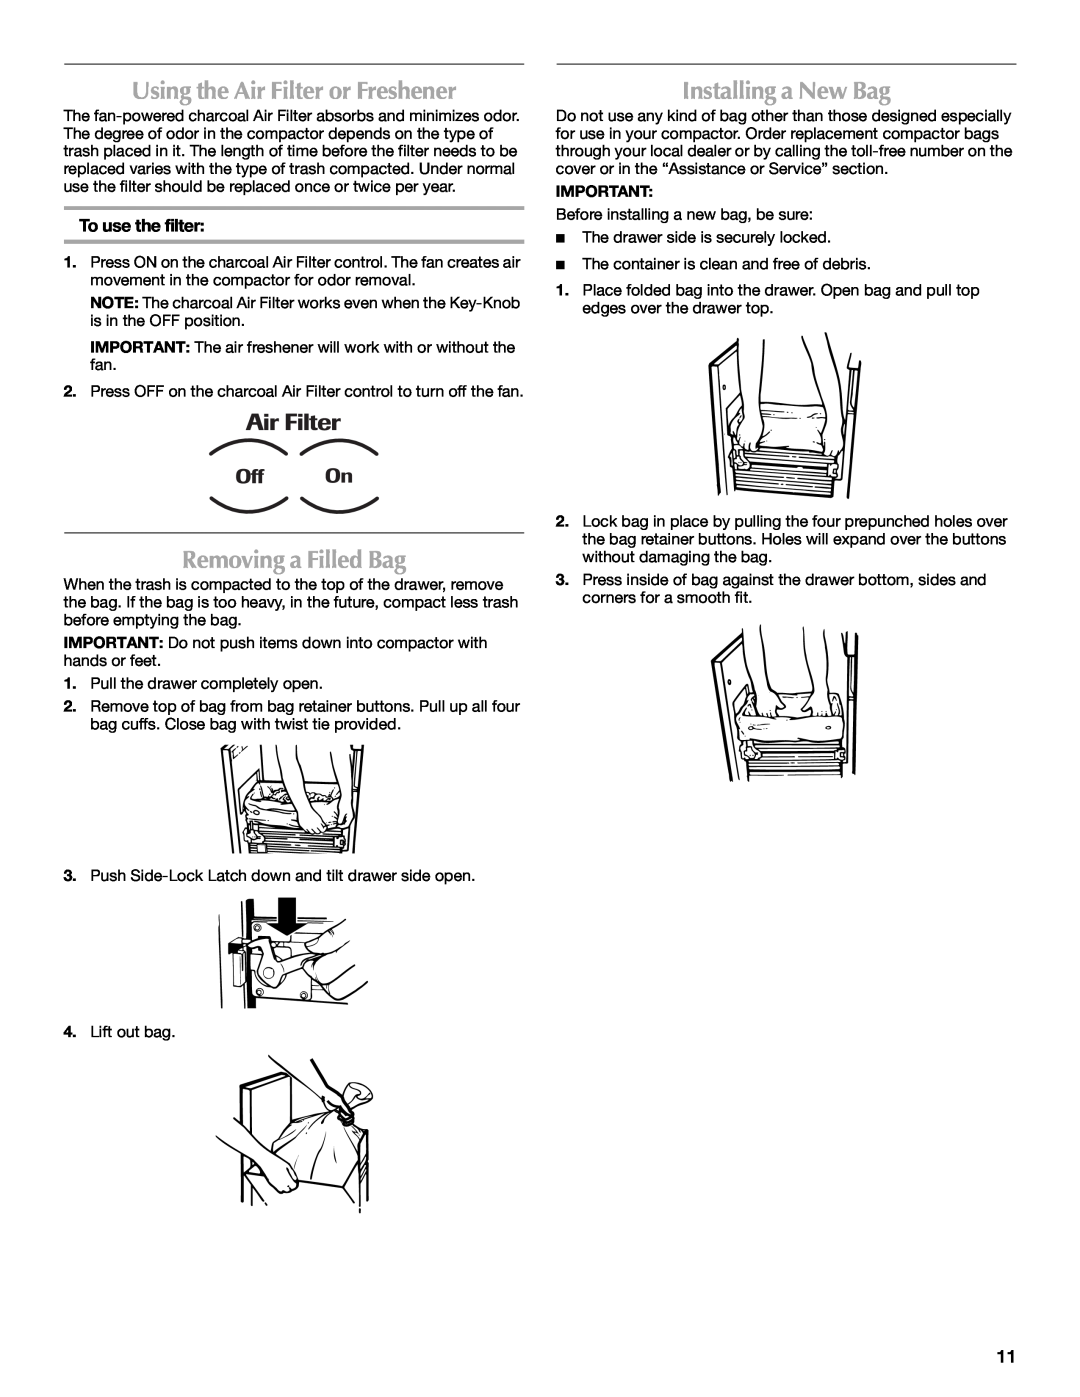 Maytag MTUC7000AWS manual Using the Air Filter or Freshener, Removing a Filled Bag, Installing a New Bag, To use the filter 